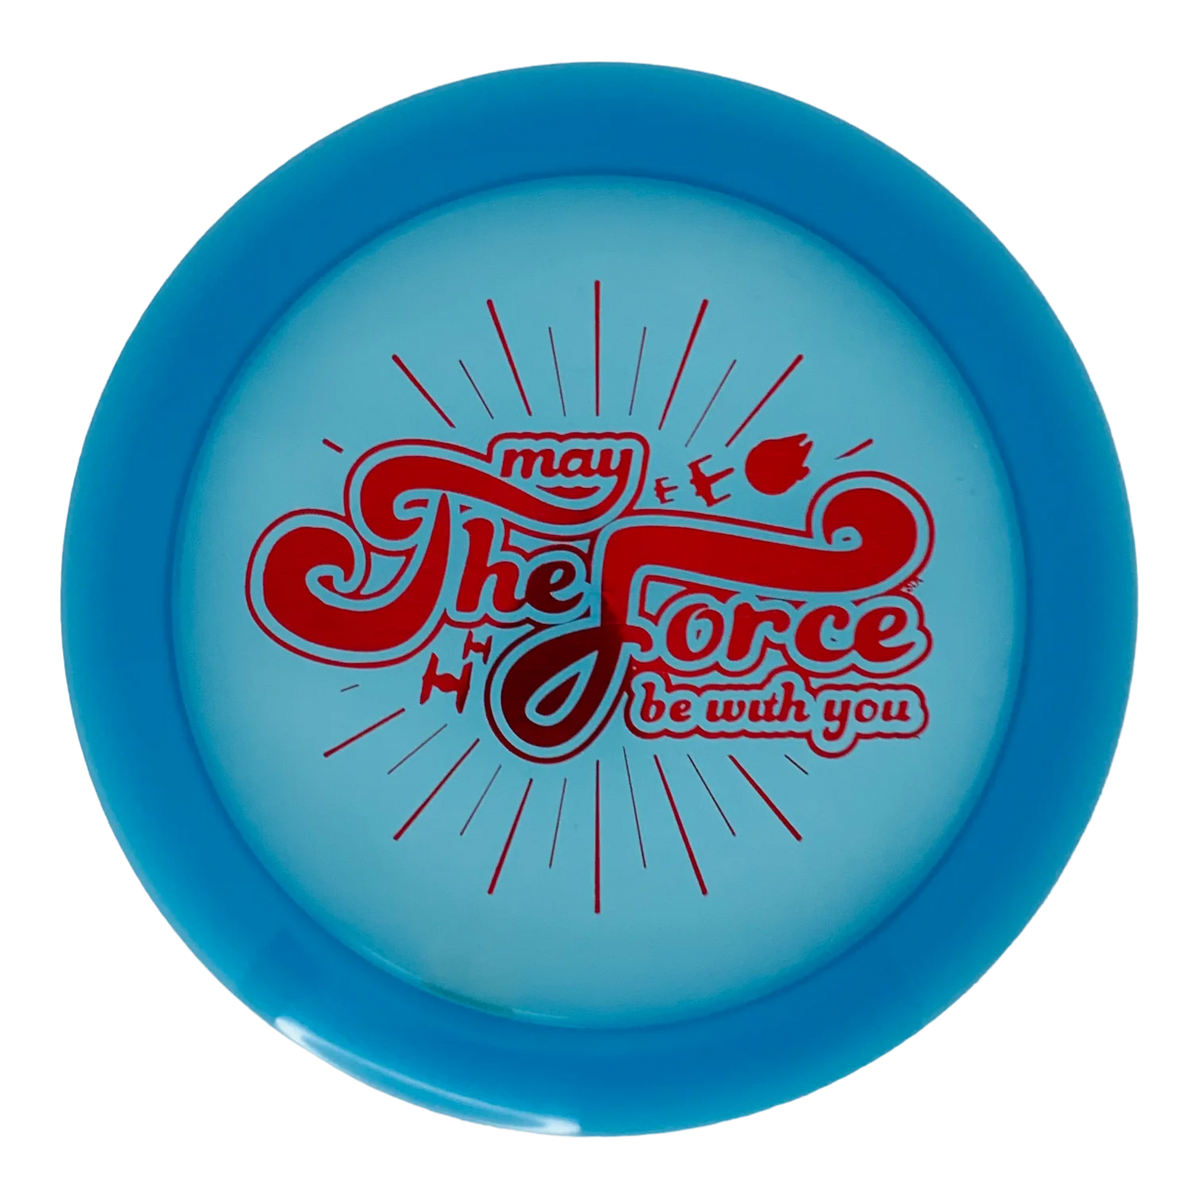 Discraft Elite Z Line Force "May The Force Be With You"